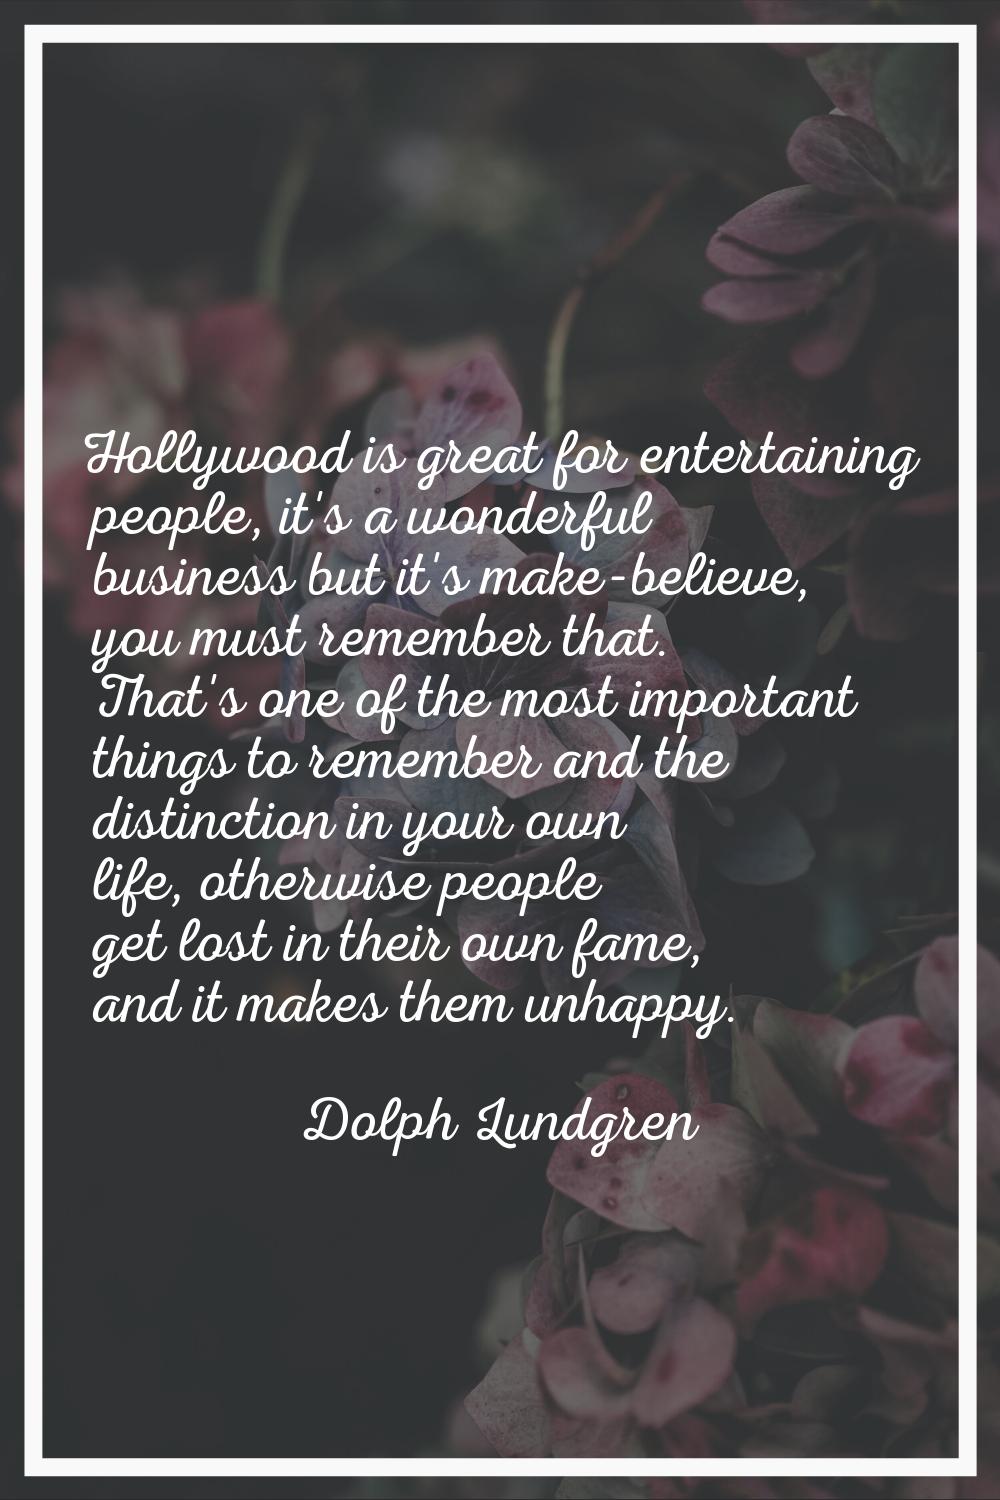 Hollywood is great for entertaining people, it's a wonderful business but it's make-believe, you mu